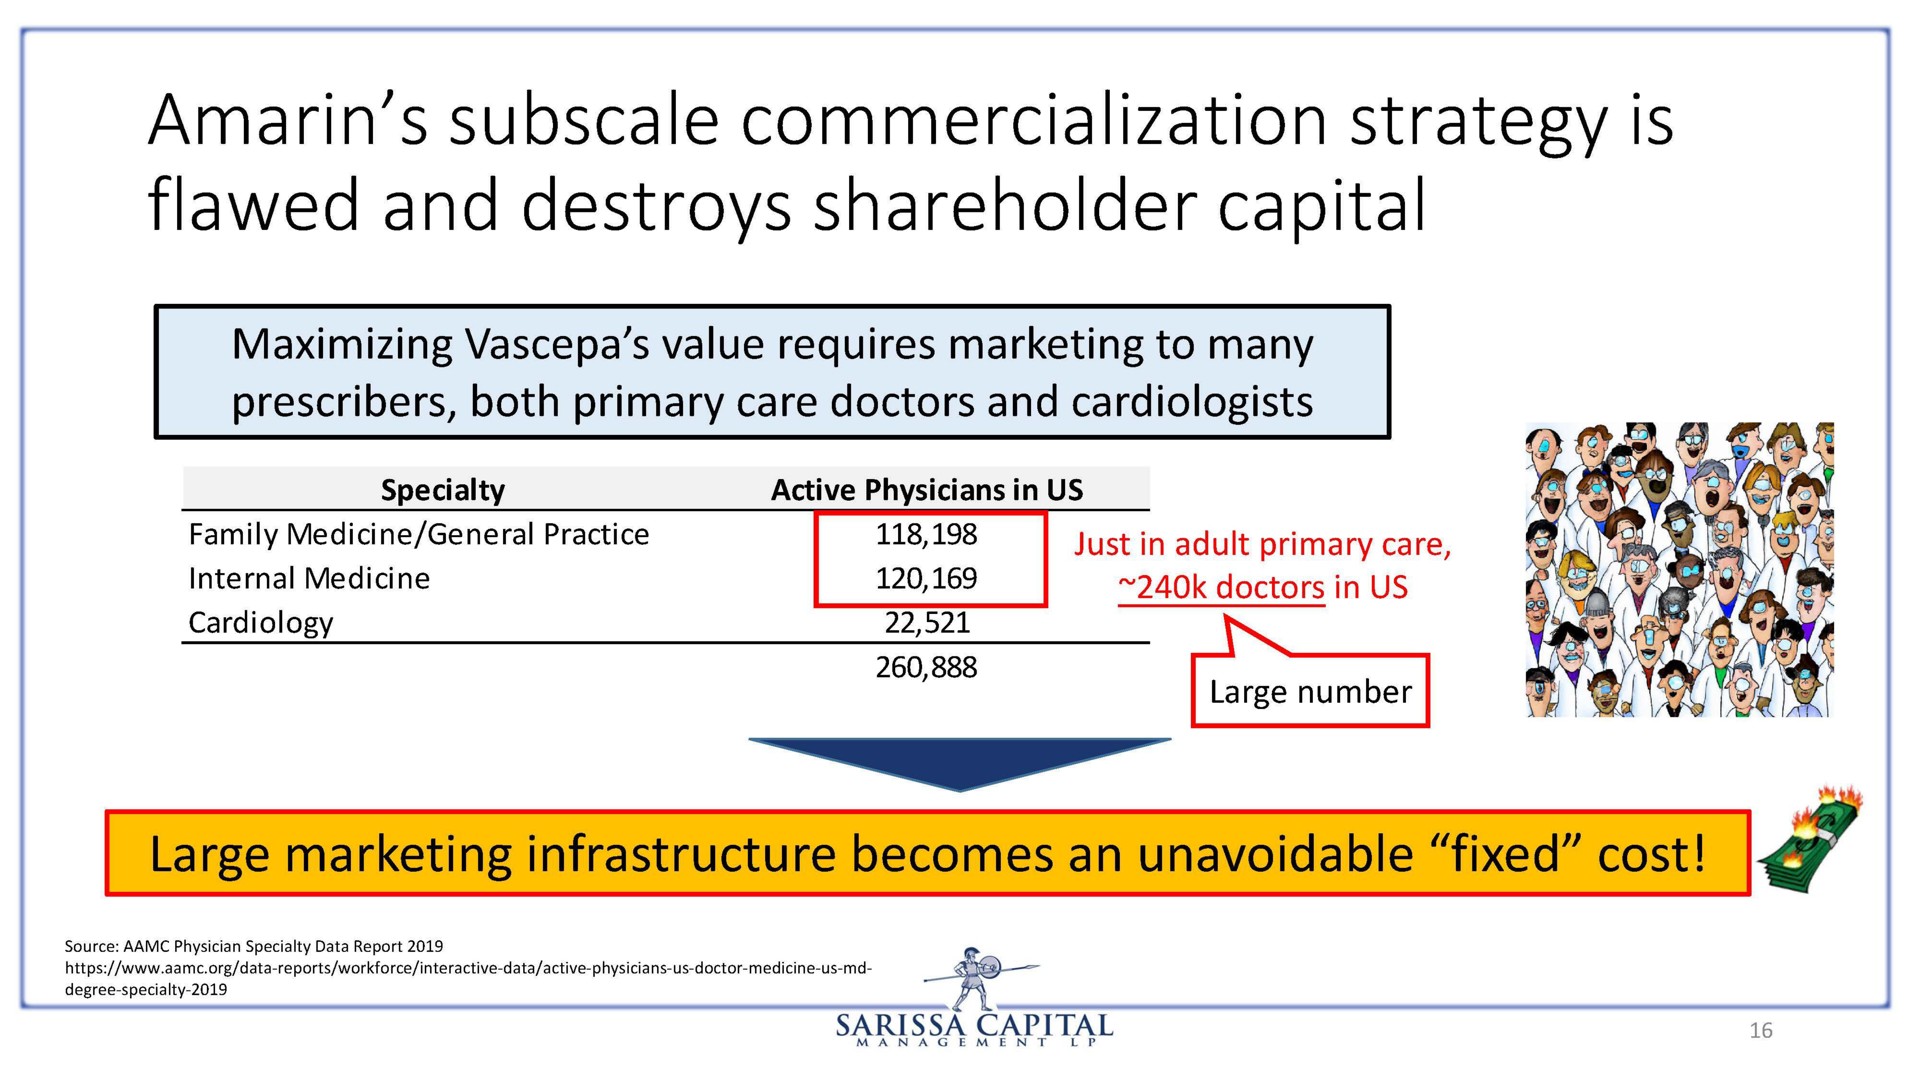 amarin commercialization strategy is flawed and destroys shareholder capital | Sarissa Capital